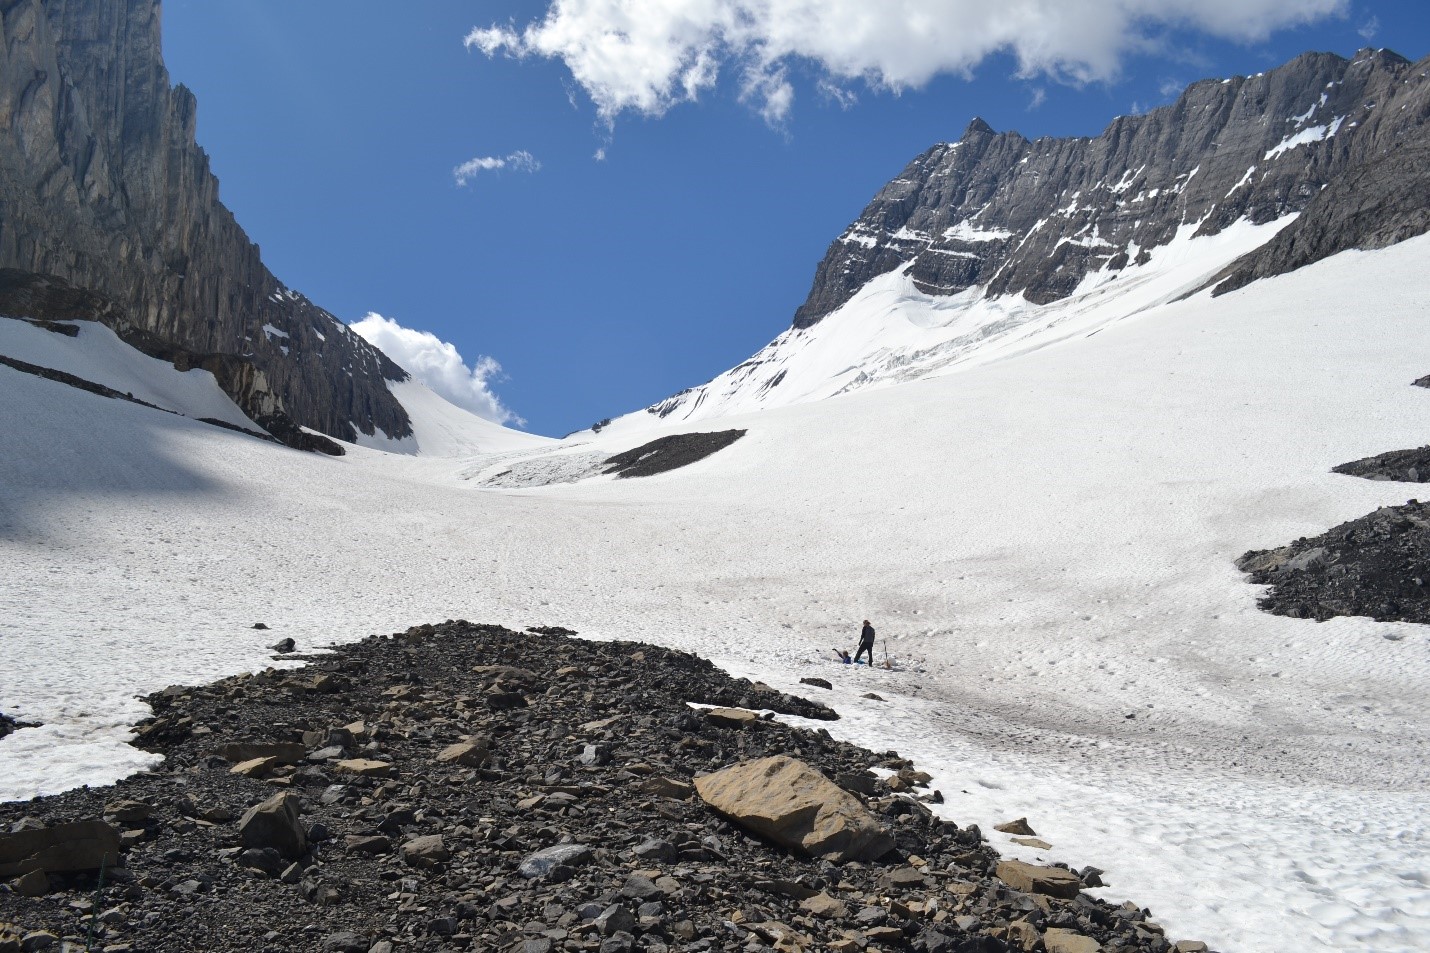 View of Robertson Glacier, Alberta, Canada, with a researcher in the foreground for scale. Robertson Glacier was one of the locations used to collect microbial samples for a new study into hydrogen-supported life beneath glaciers. Image: NASA / Boyd 